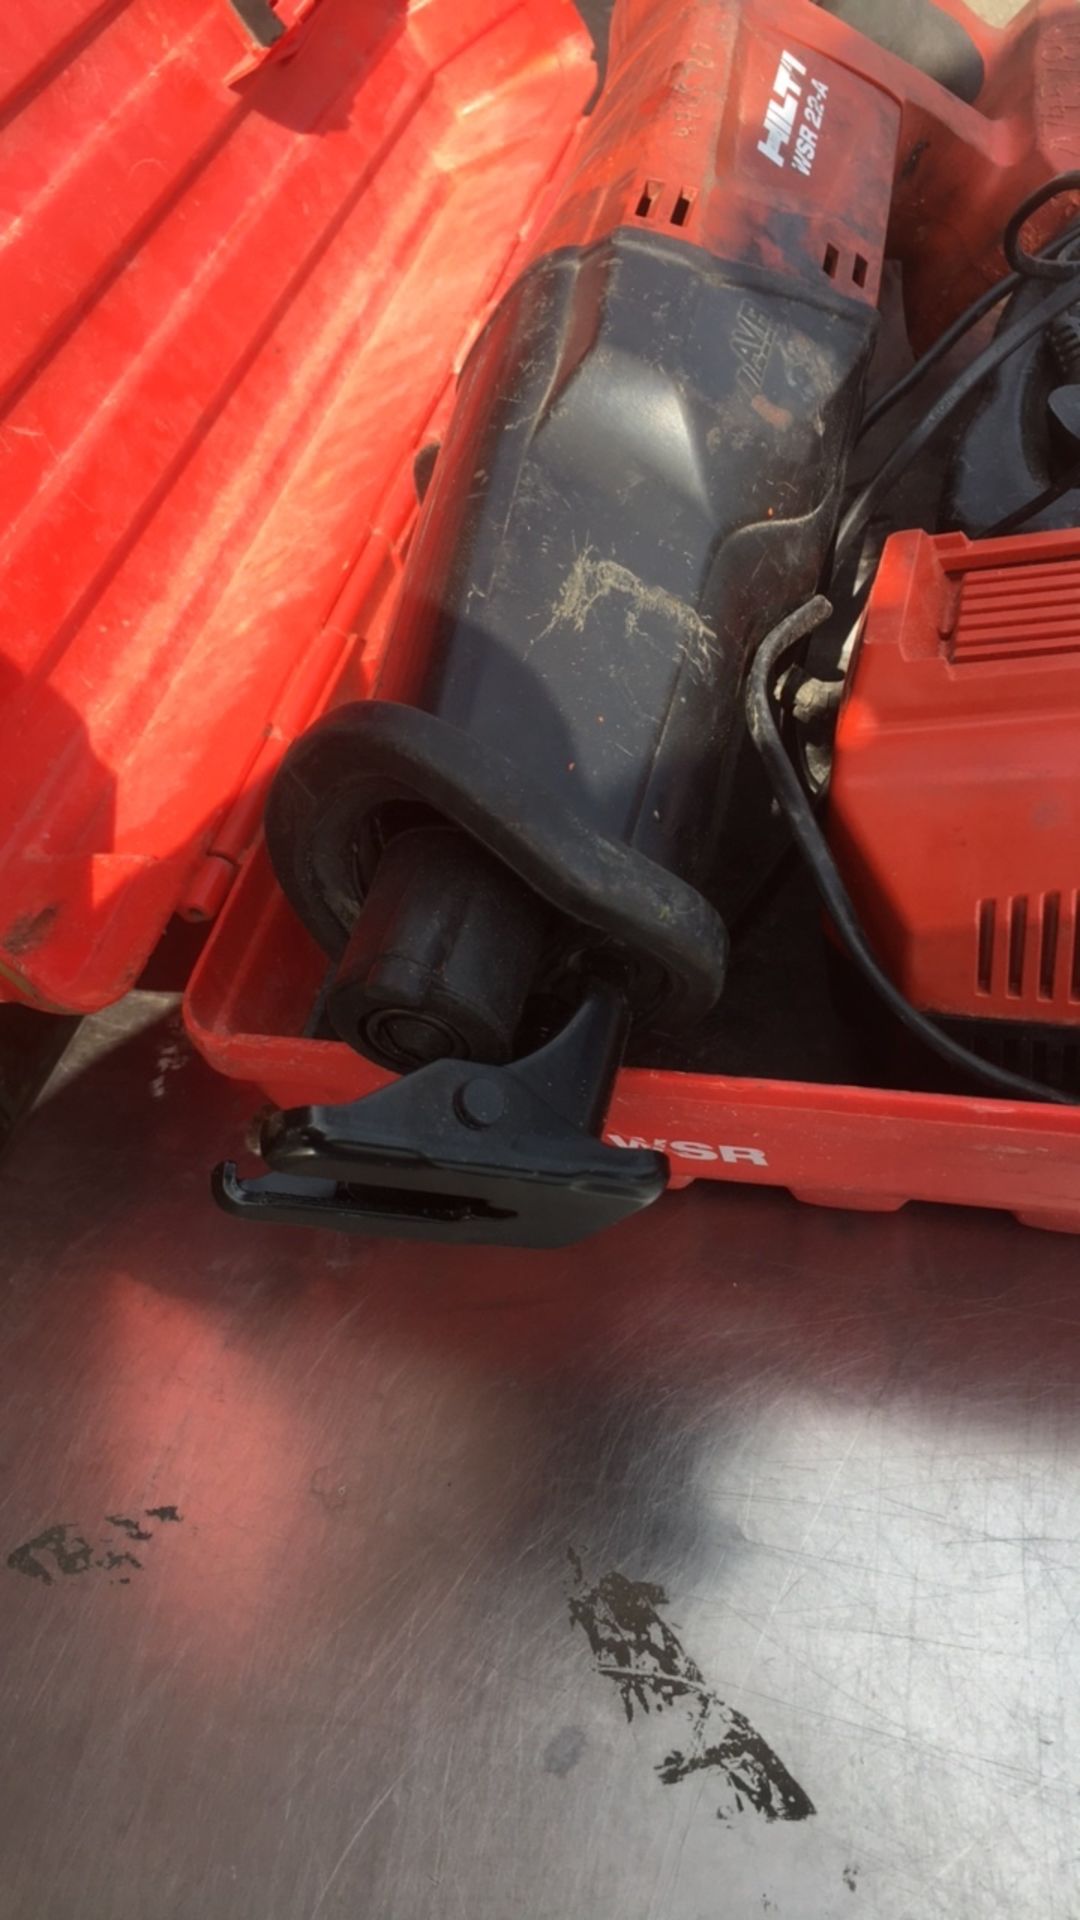 Hilti WST22-A (A745780) - Image 3 of 4